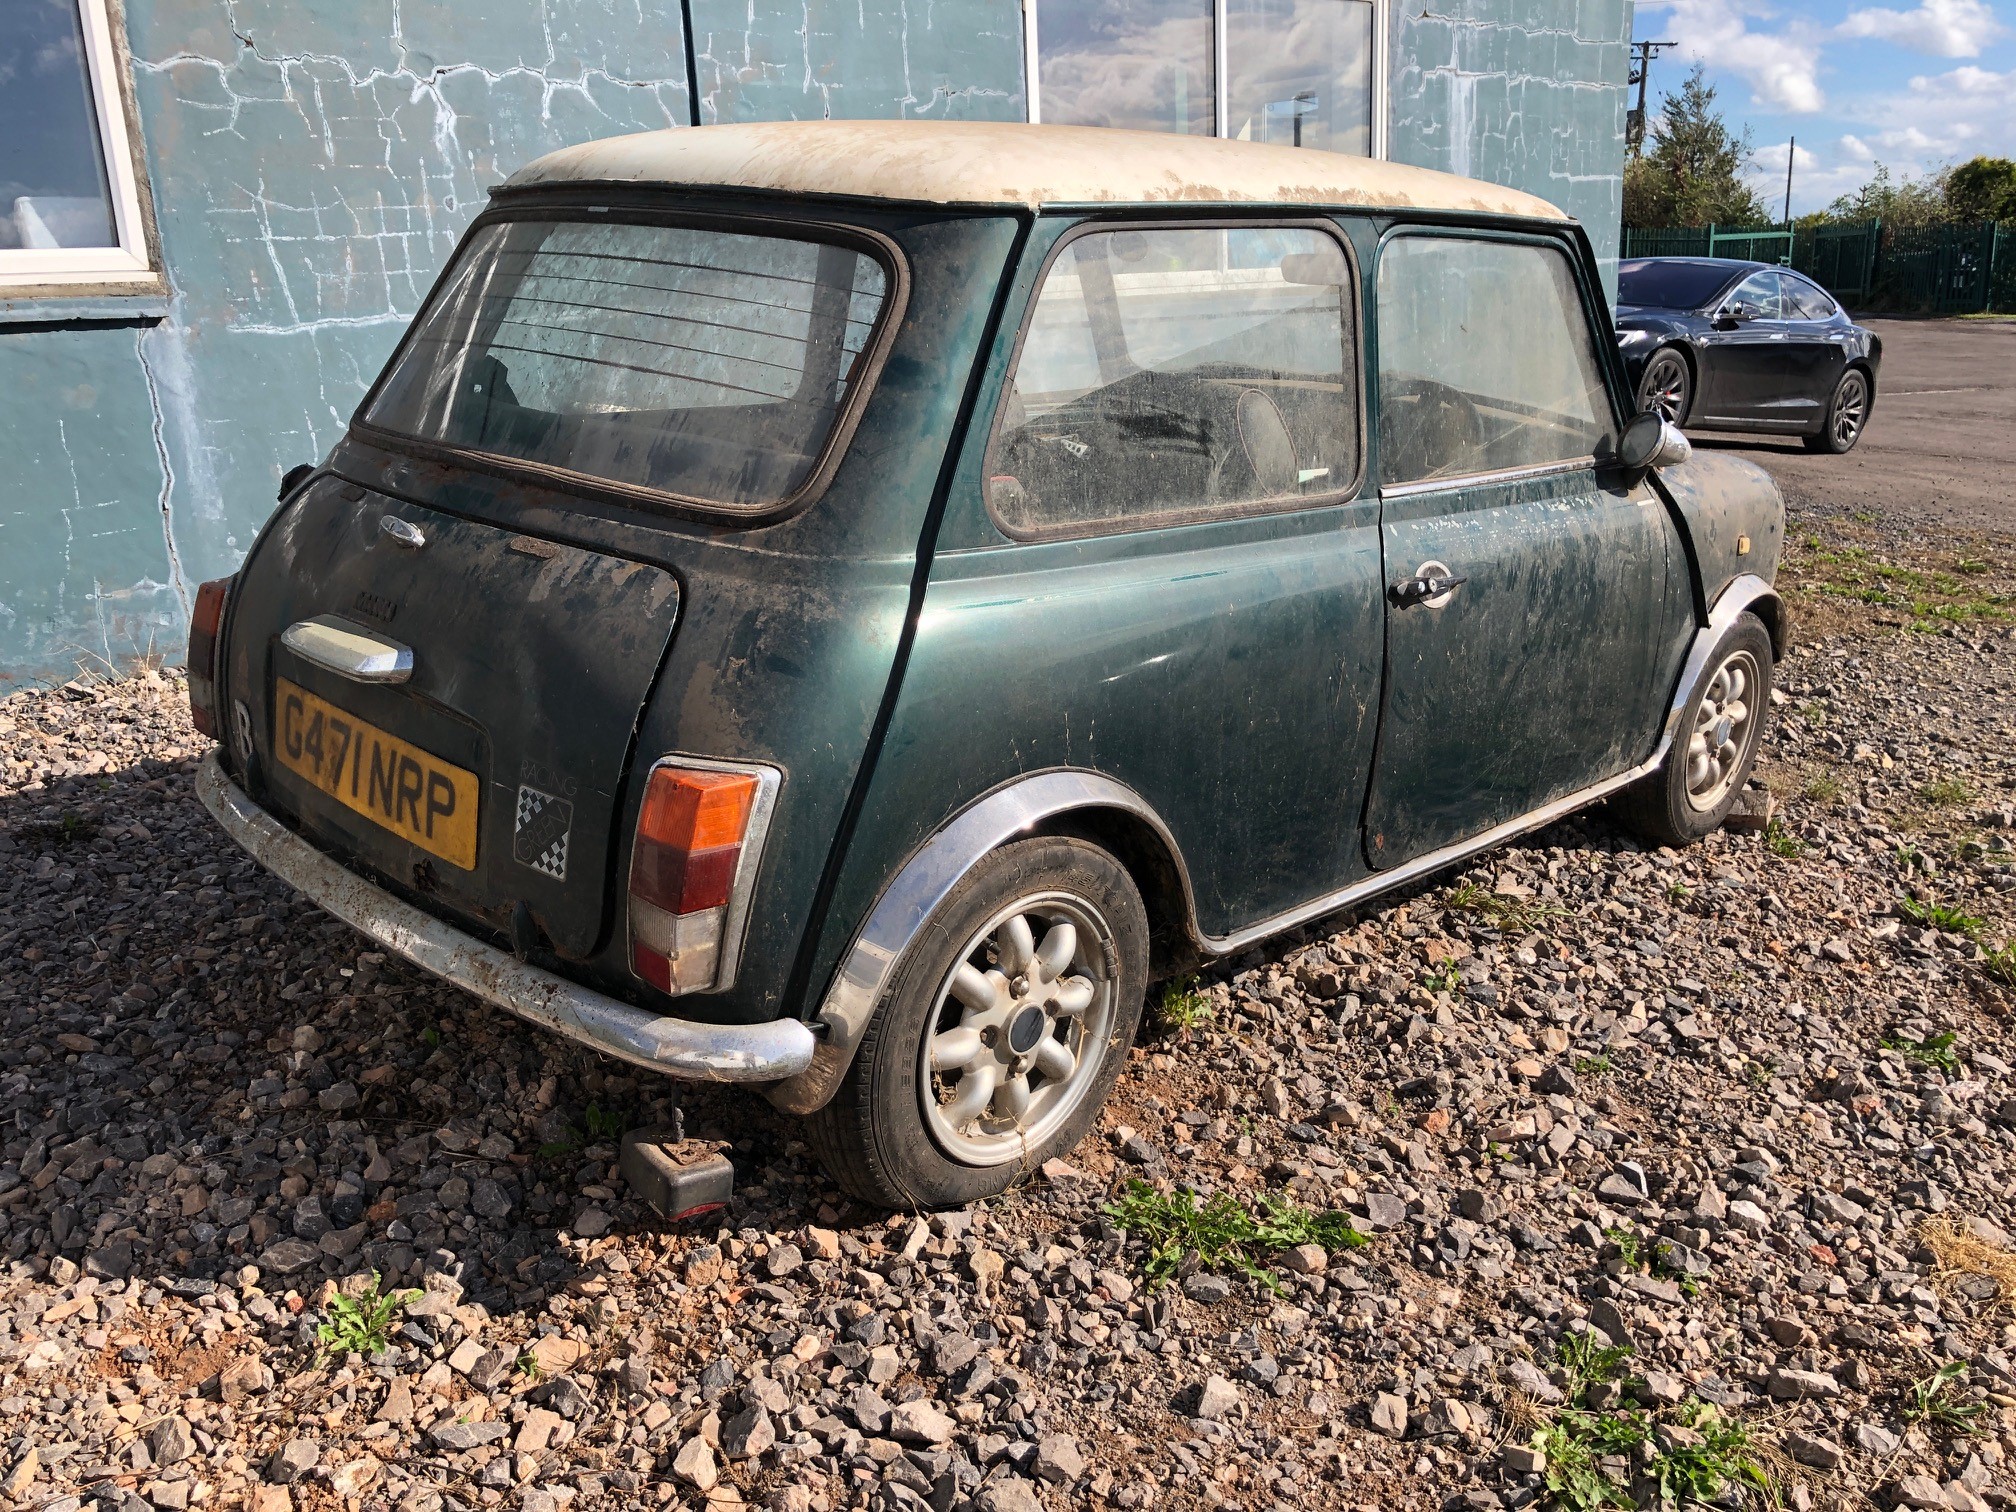 1990 Mini Racing Green Checkmate Registration number G471 NRP Being sold without reserve Rare 30 - Image 5 of 7